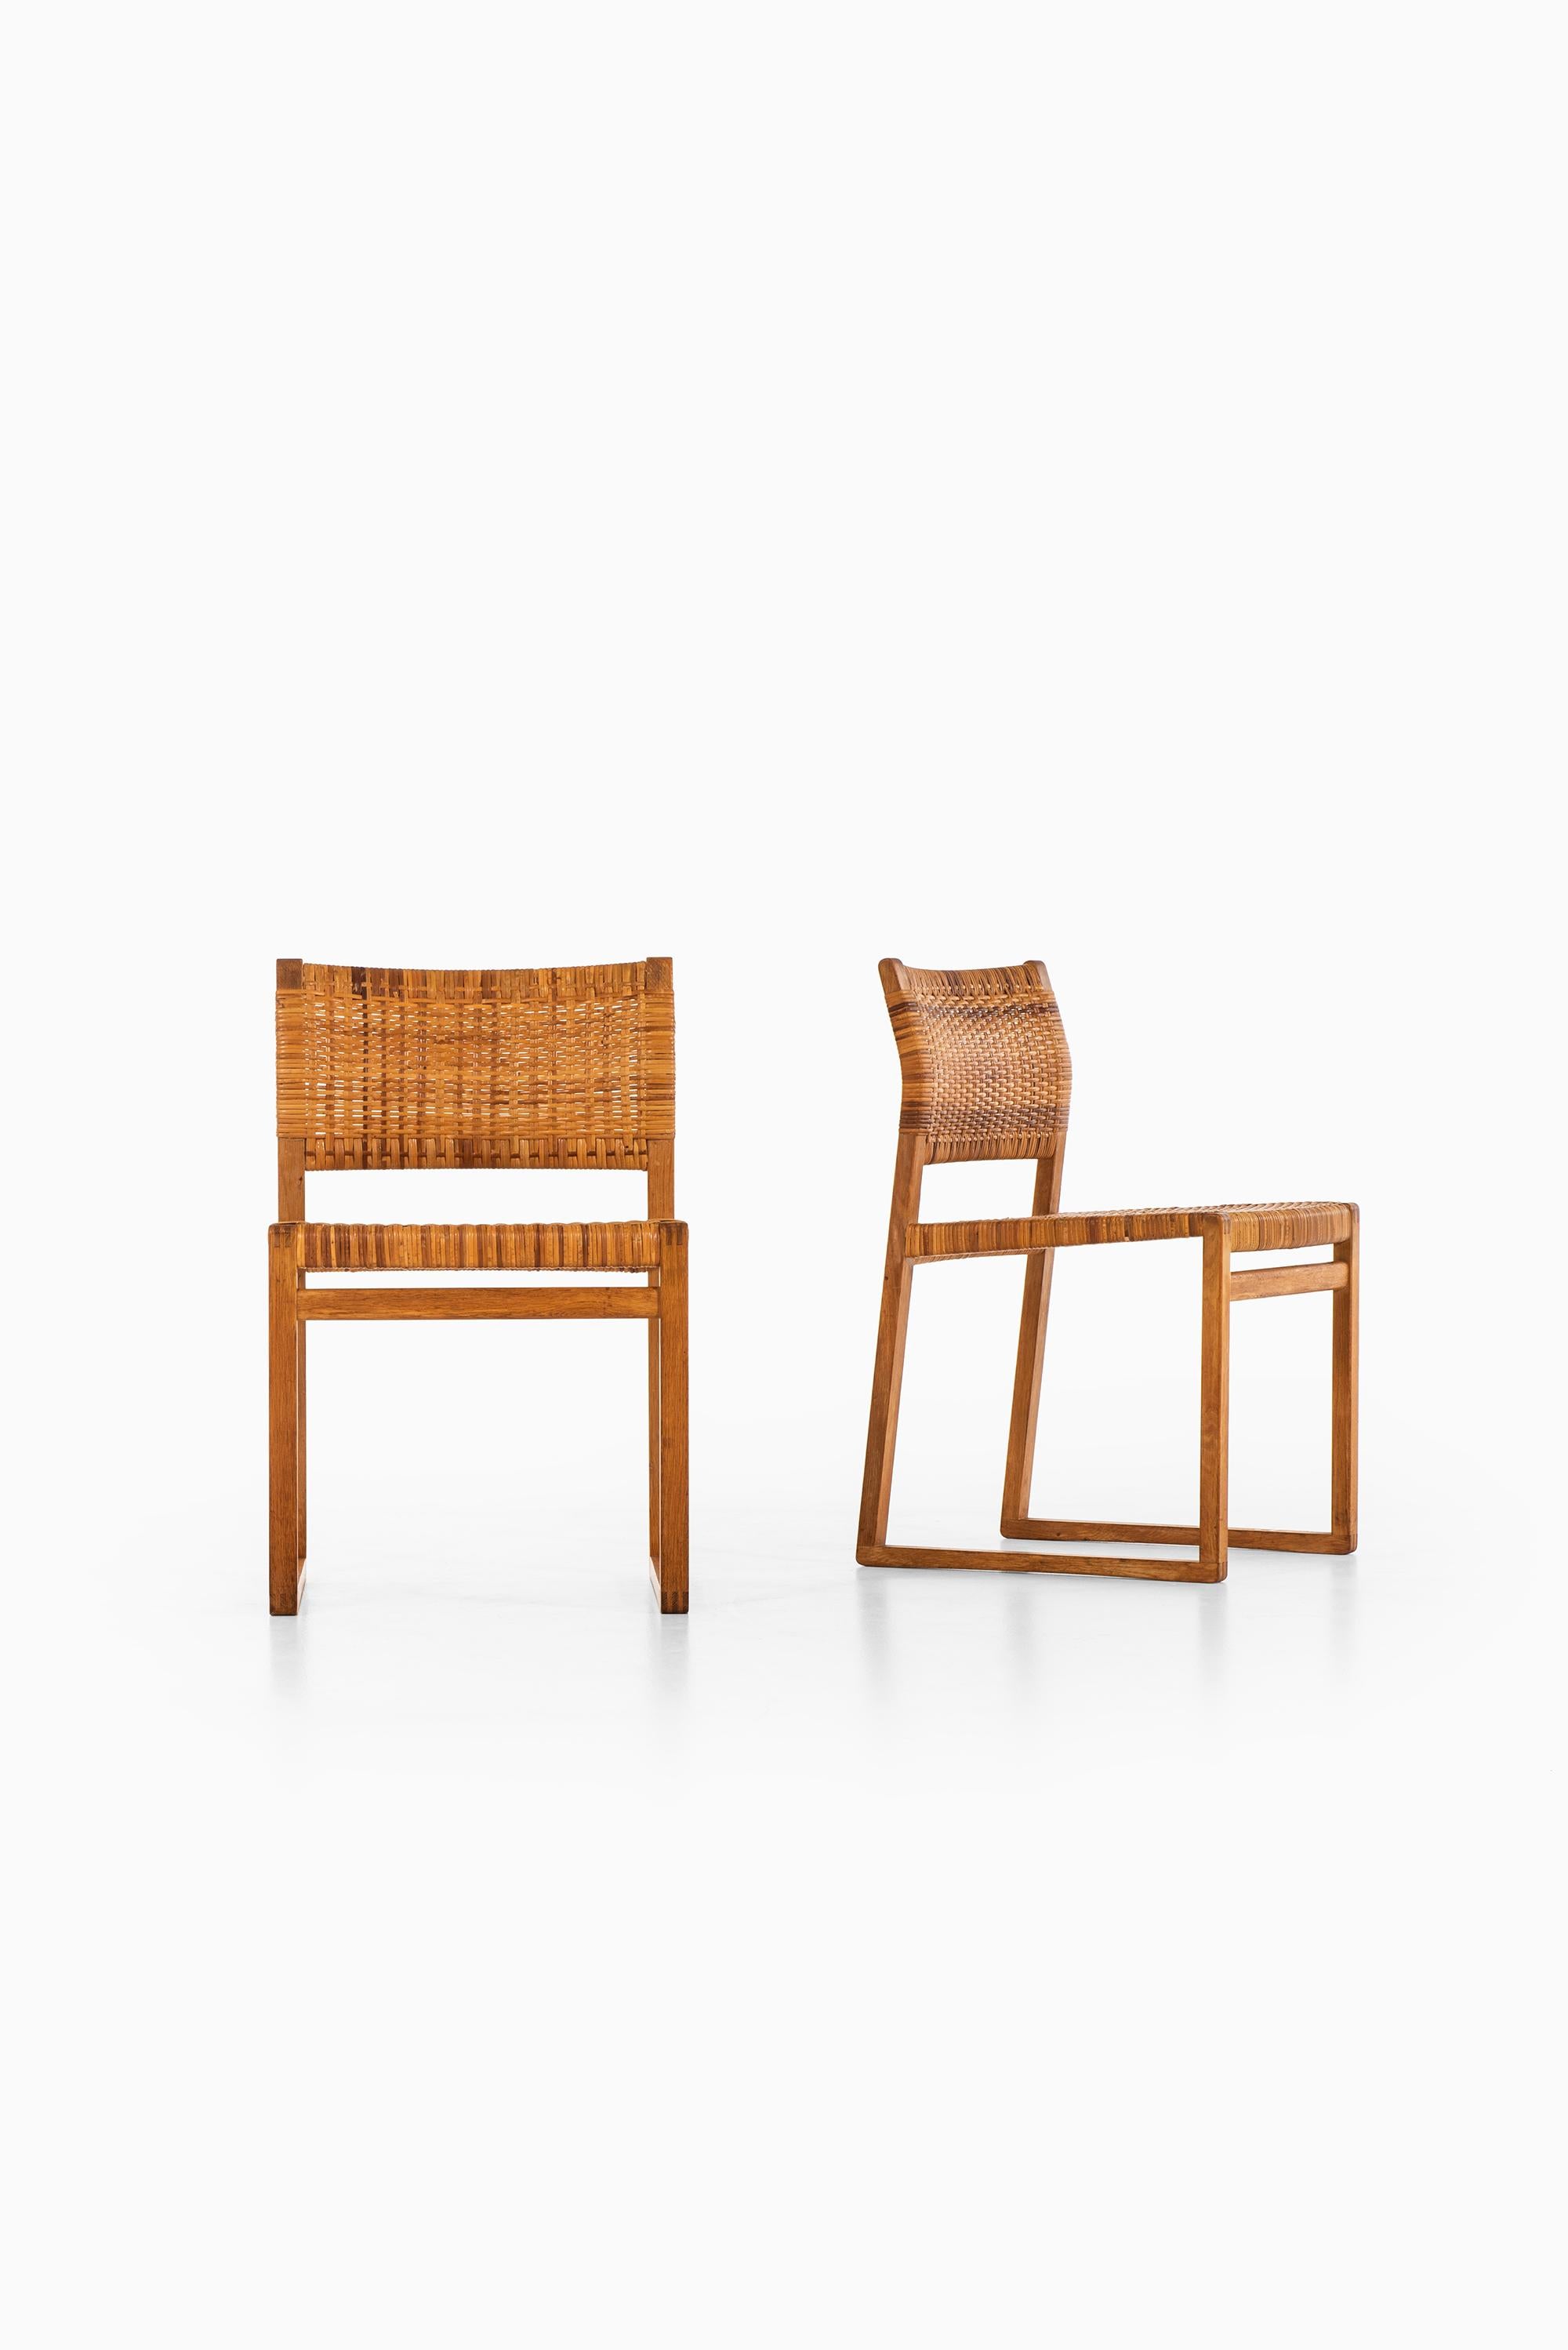 Rare set of 6 dining chairs model BM-61 designed by Børge Mogensen. Produced by Fredericia Stolefabrik in Denmark.